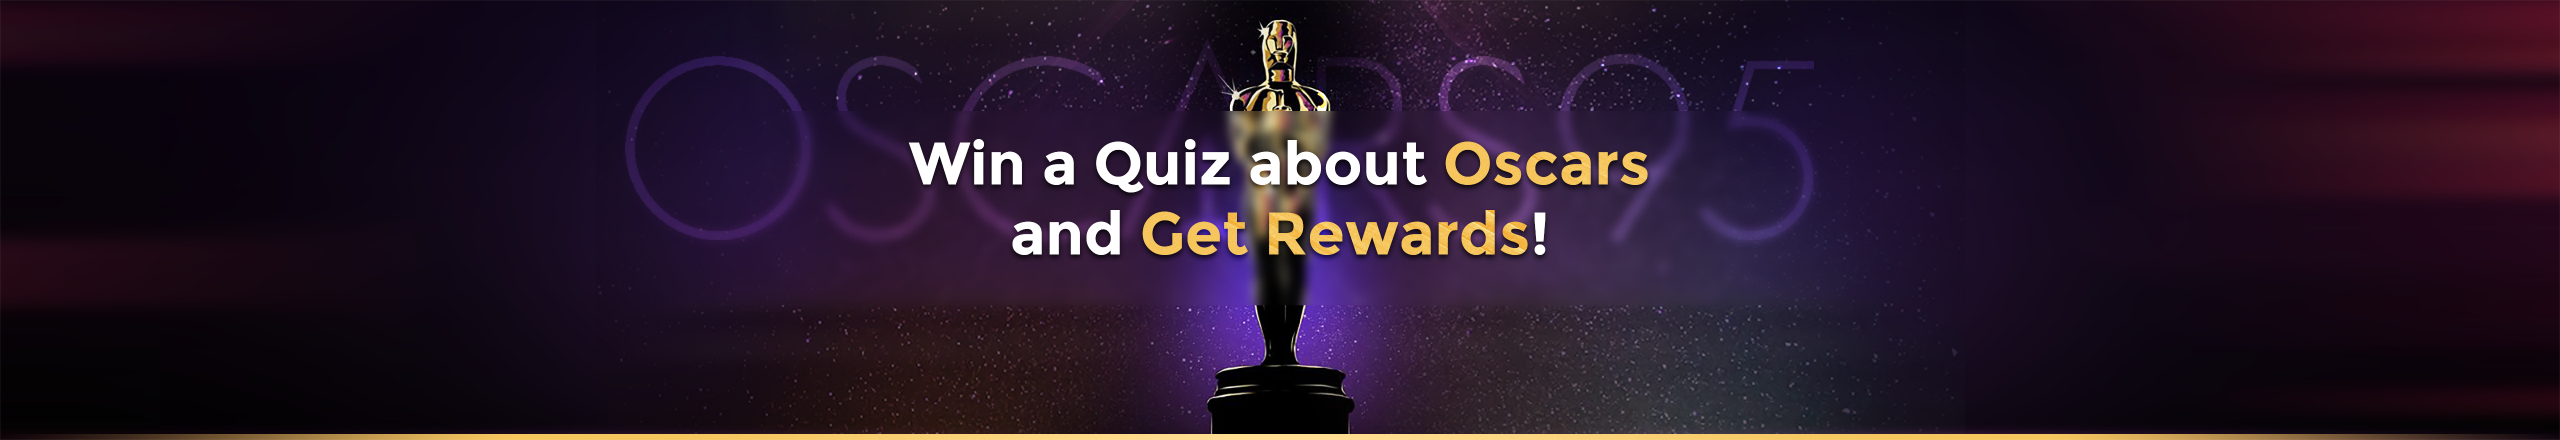 Test How Well You Know About The Oscars